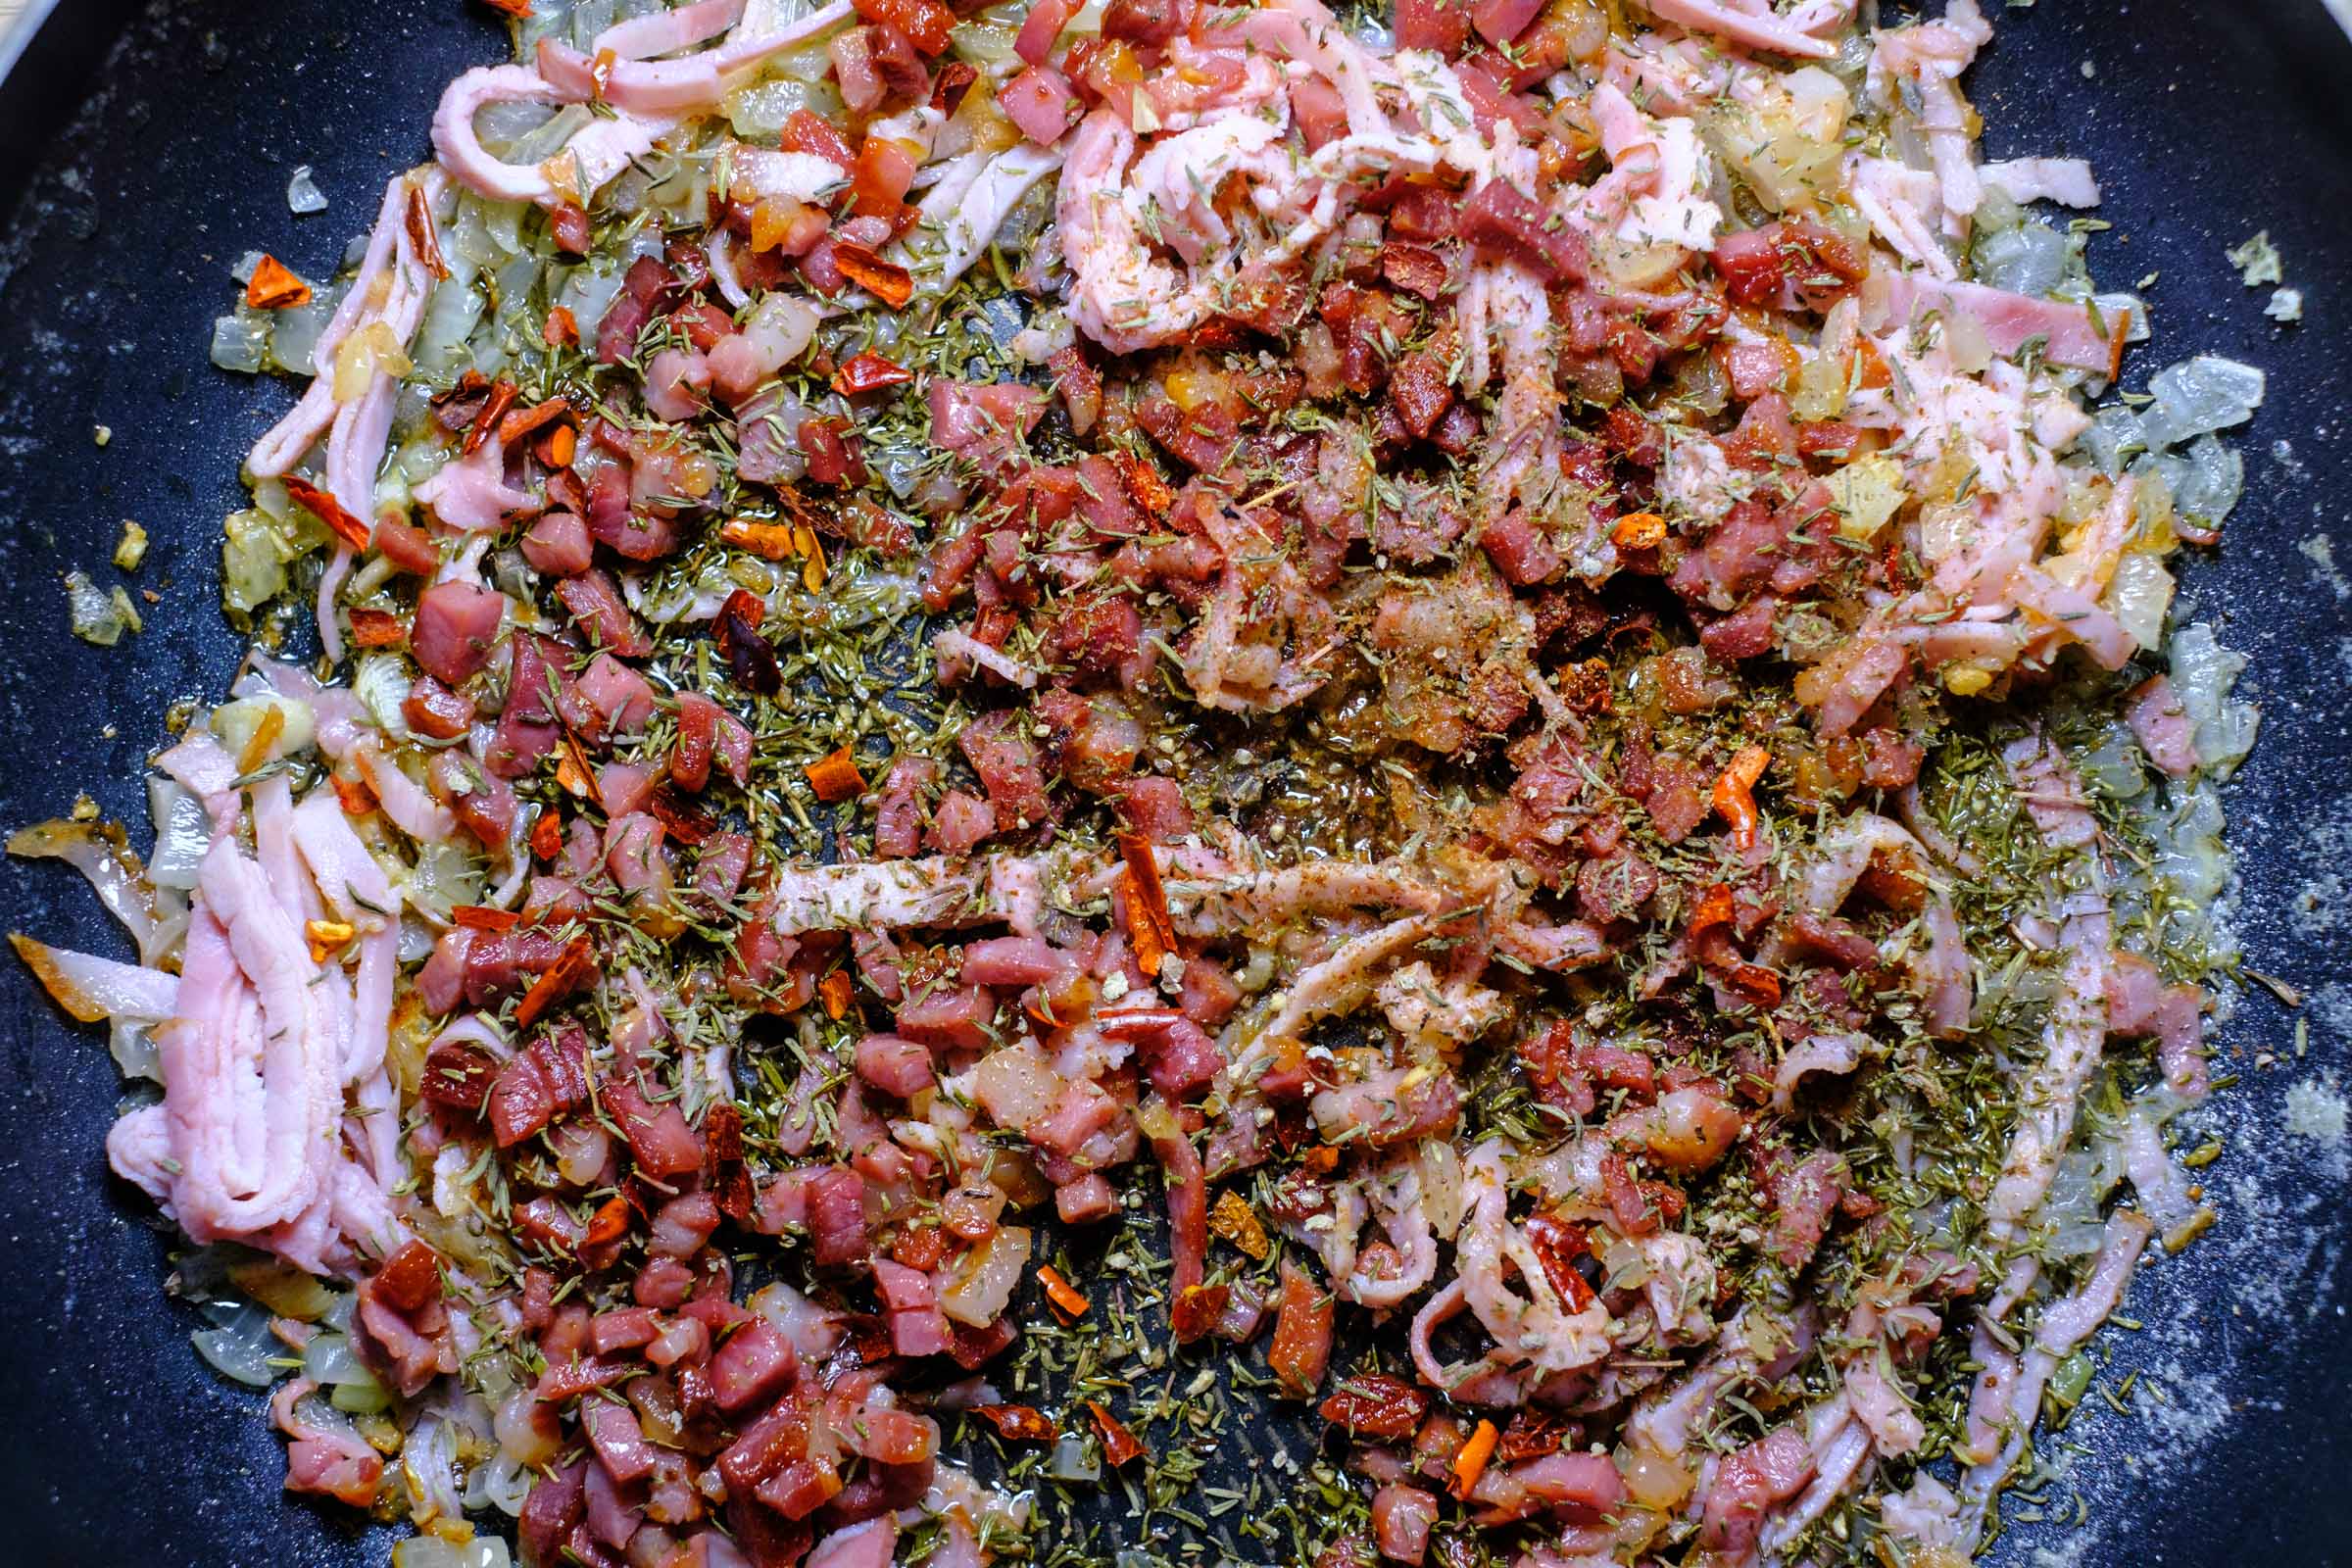 Bacon, ham, onion and garlic in the pan